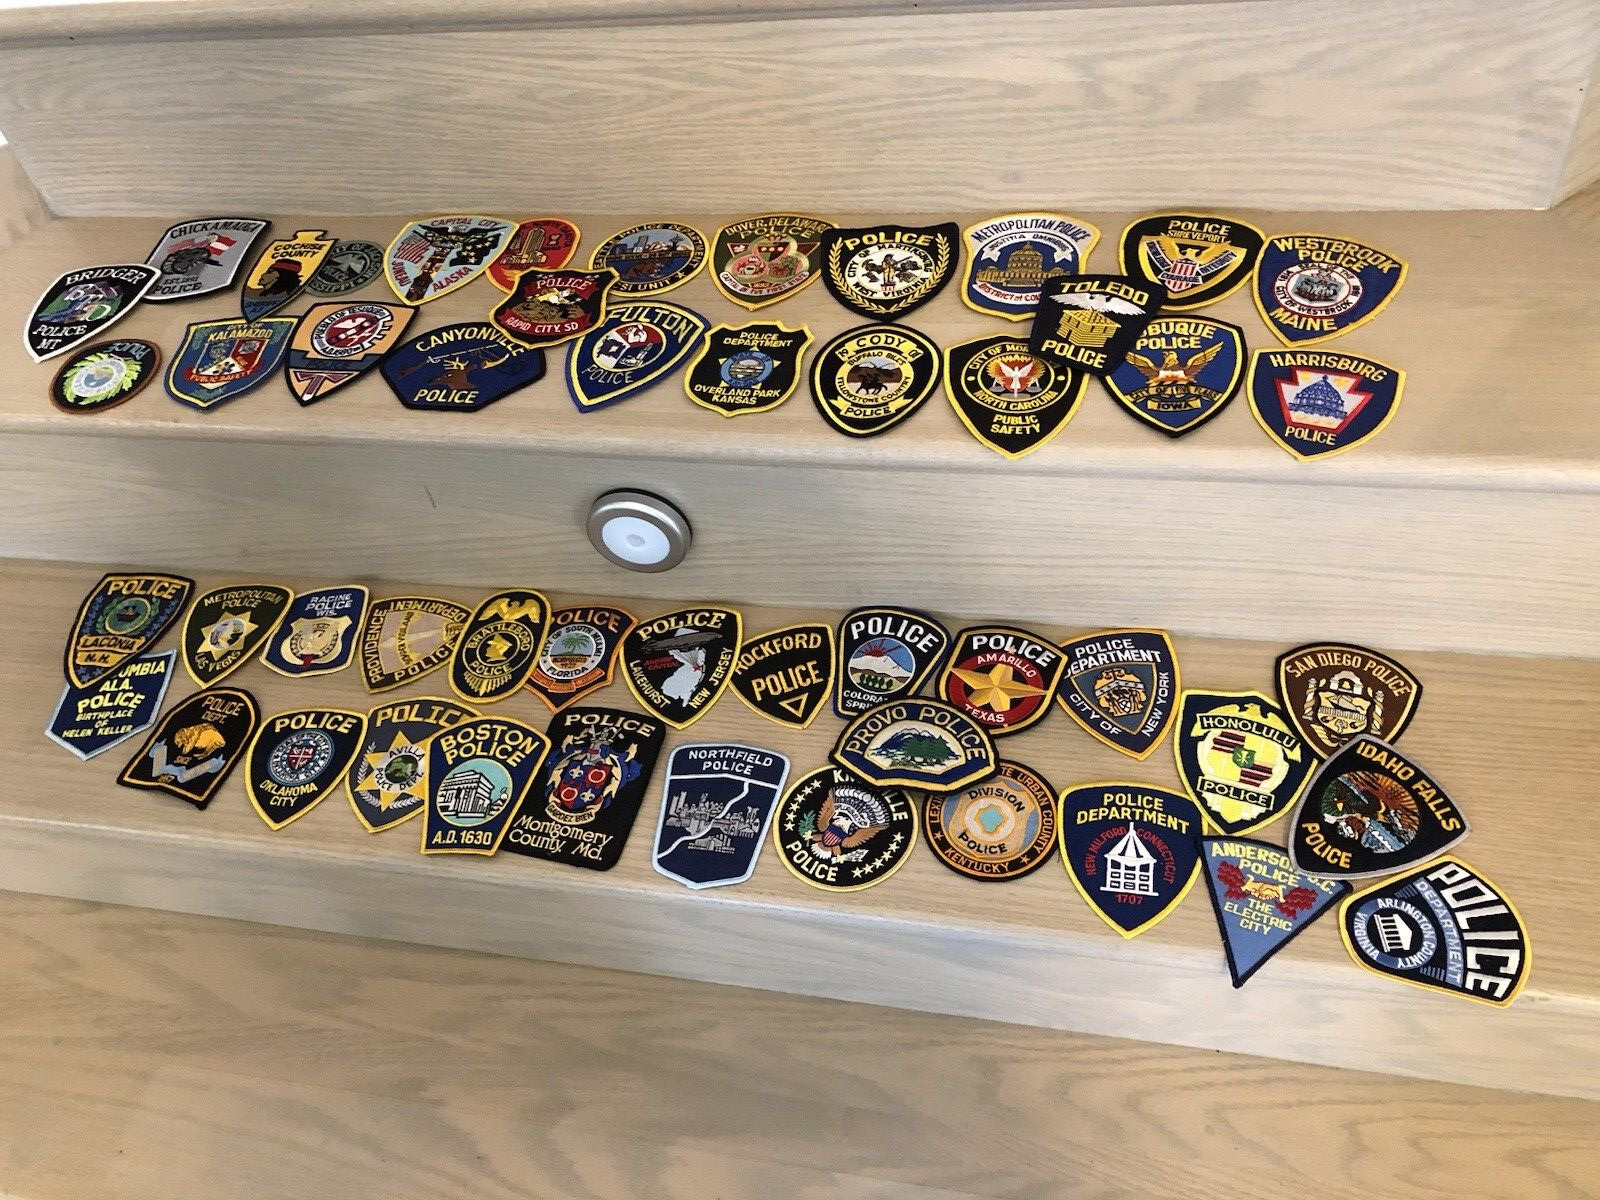 Collectors Police Patches Lot of 51 Pieces Different State Patches New #1 Muni